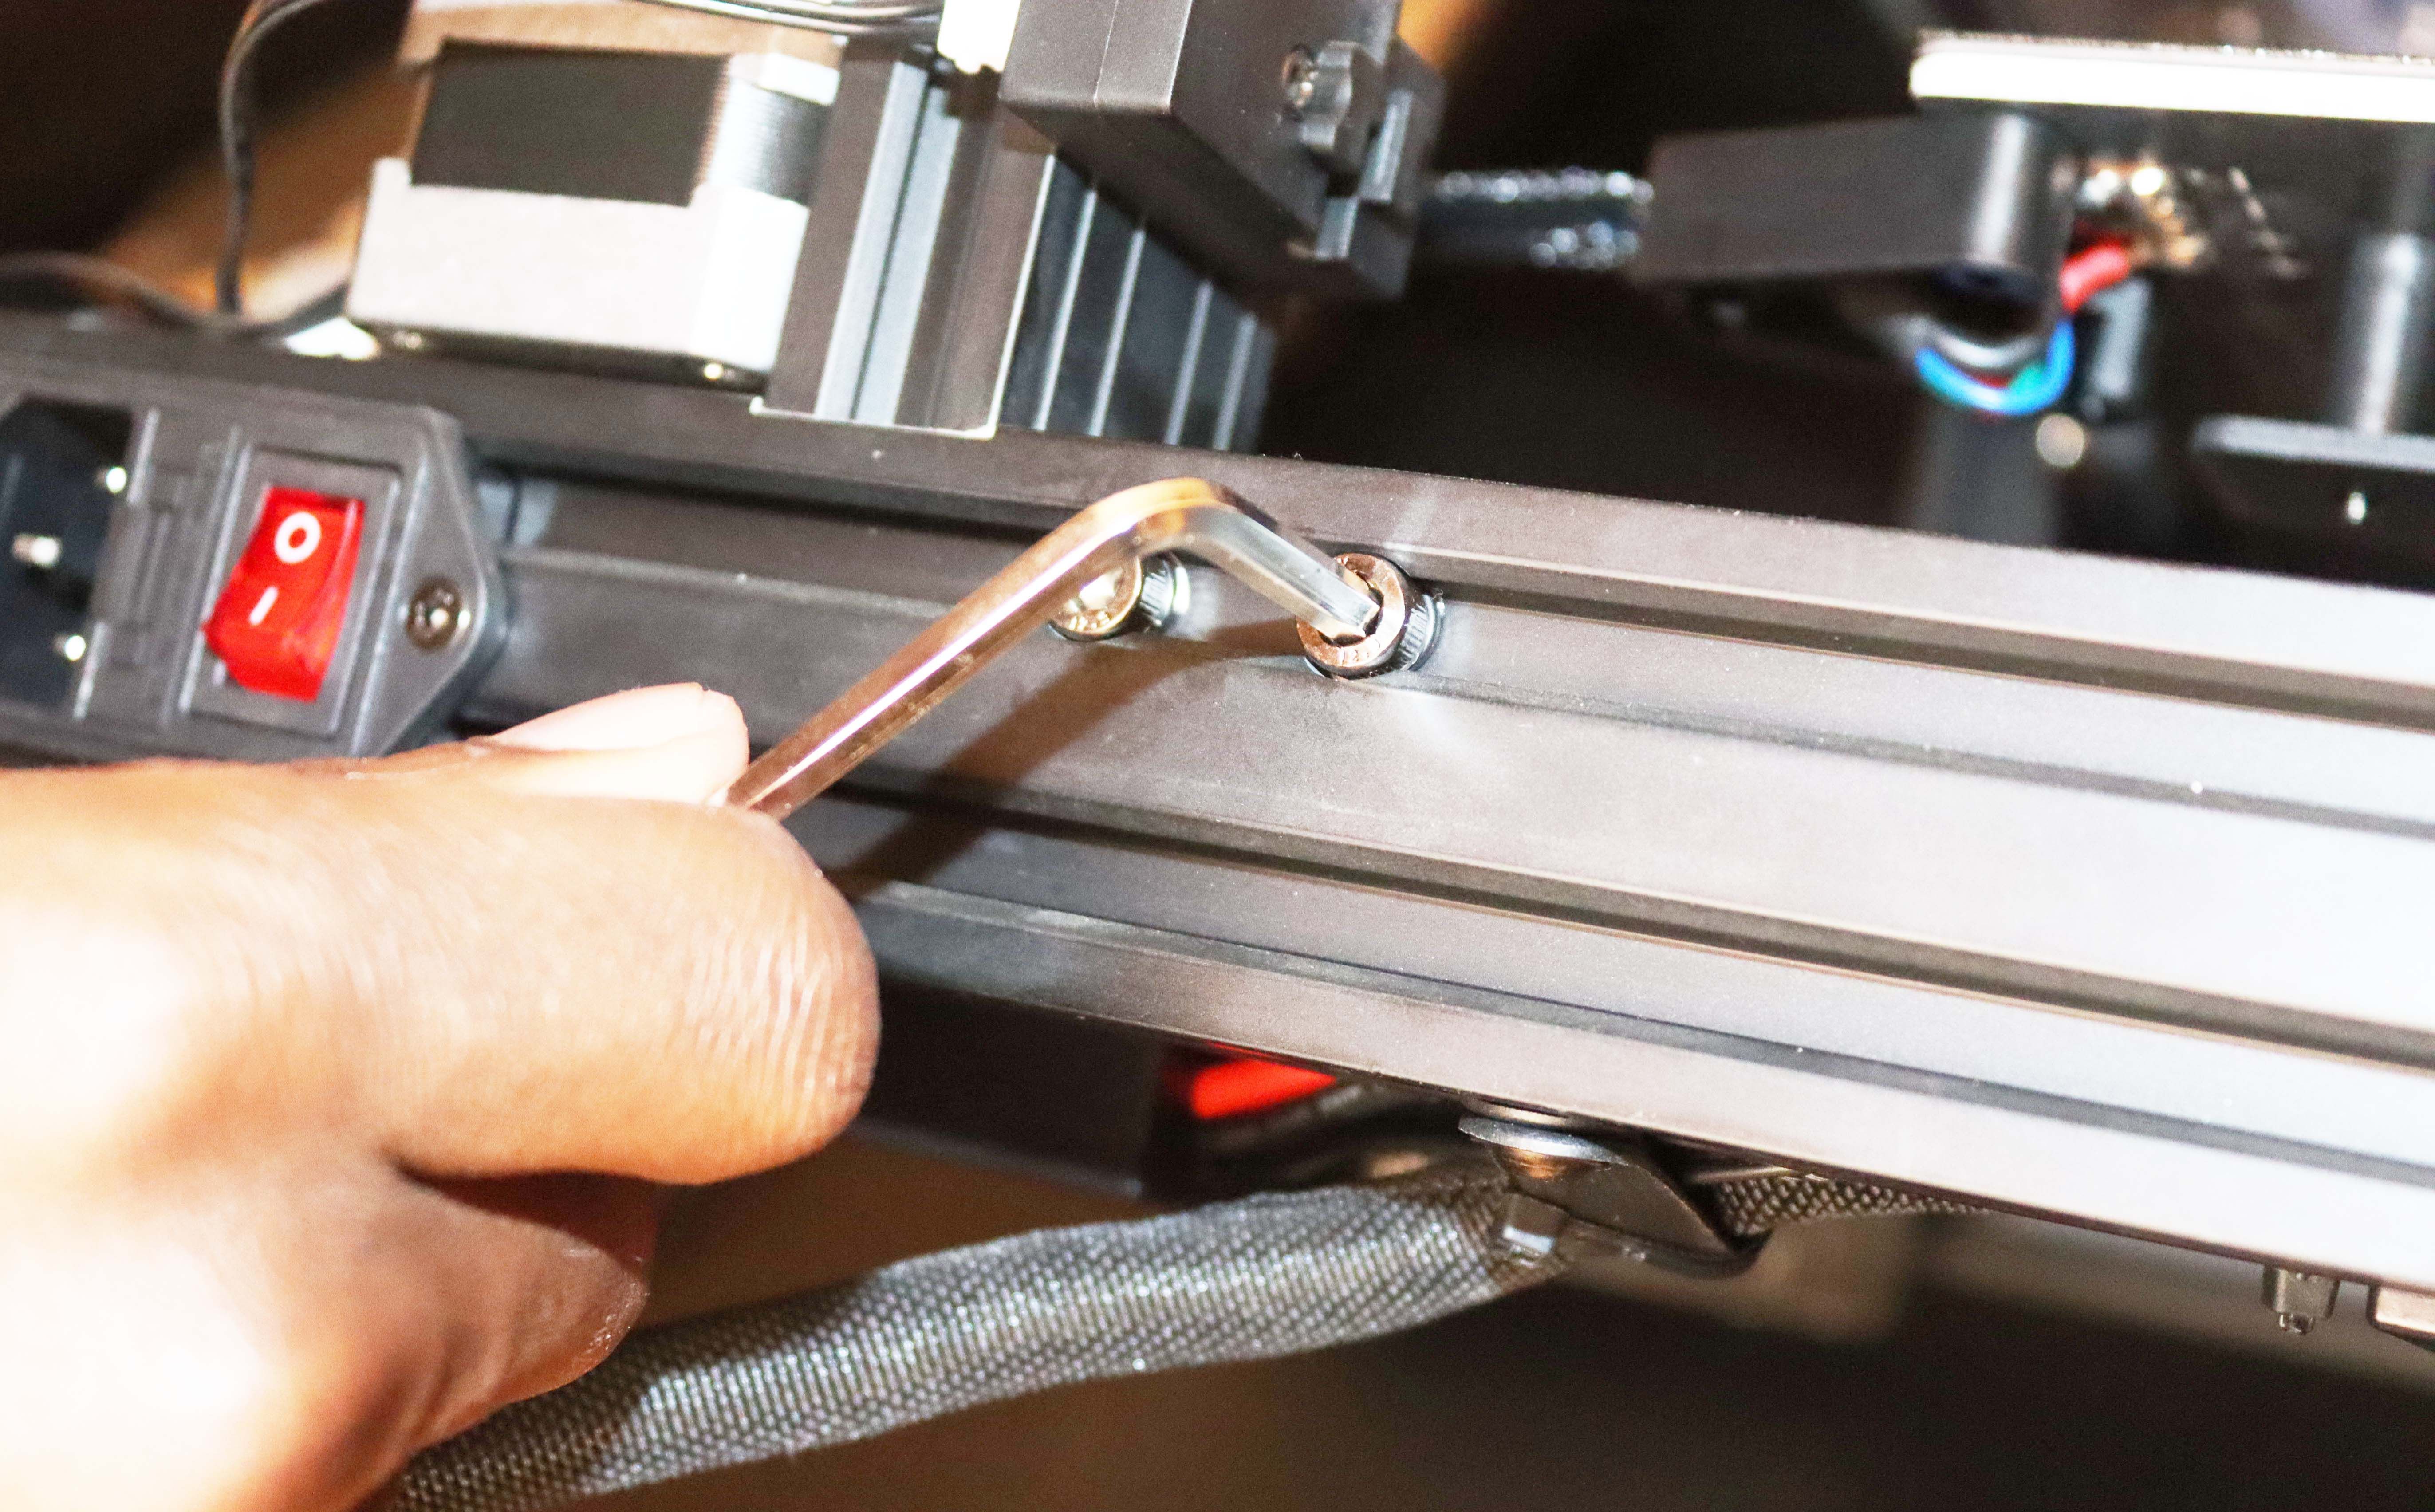 Using a wrench to tighten the screws on the base of the printer